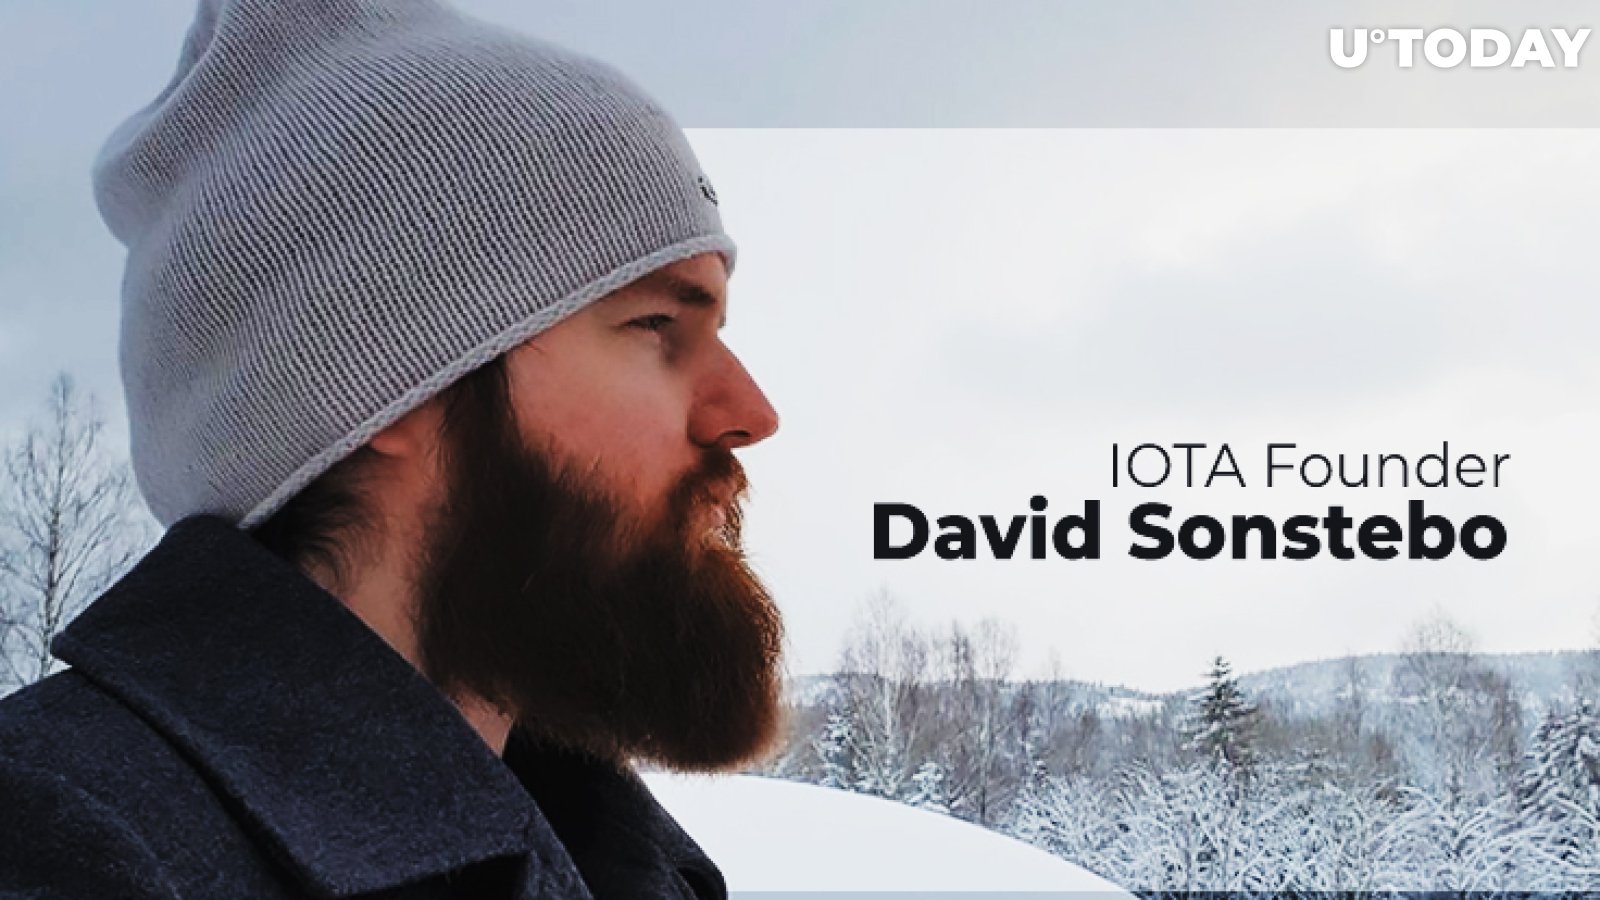 Exclusive Interview with IOTA Founder David Sonstebo on Tangle, Climate KIC Project, and Plans for 2020